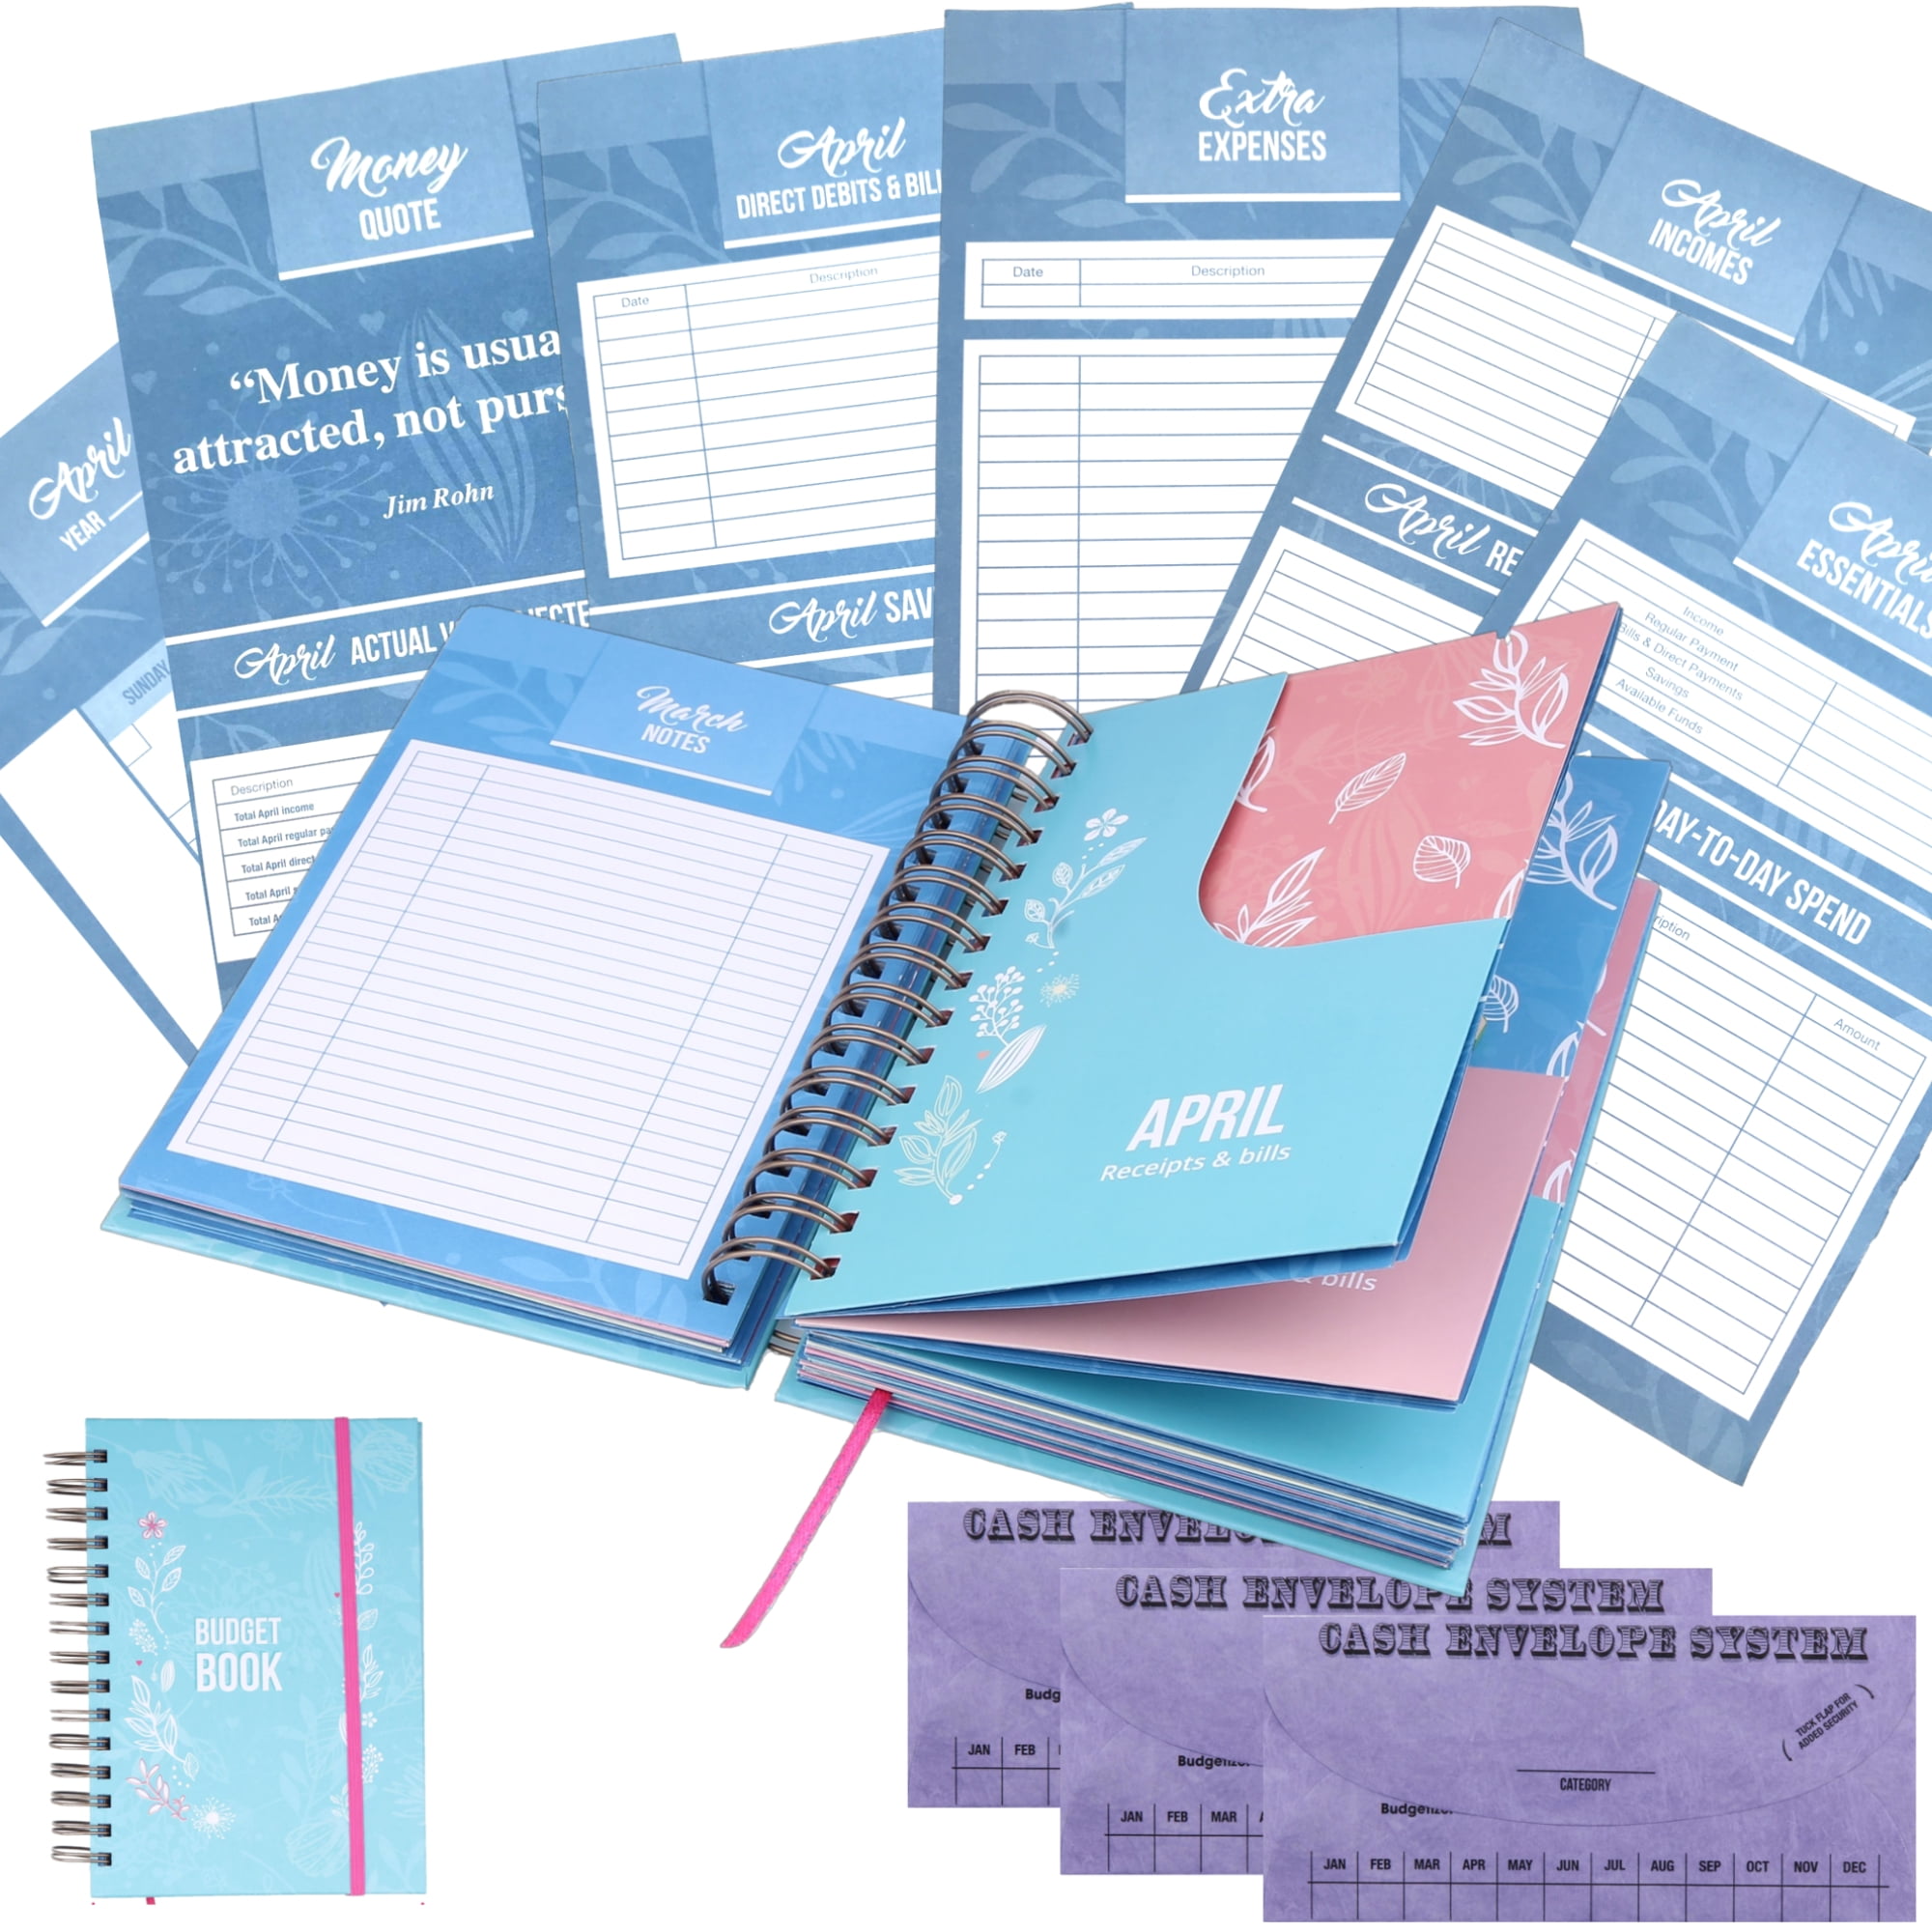 Balance The Books by Busy B Record Spending File Receipts Storage 